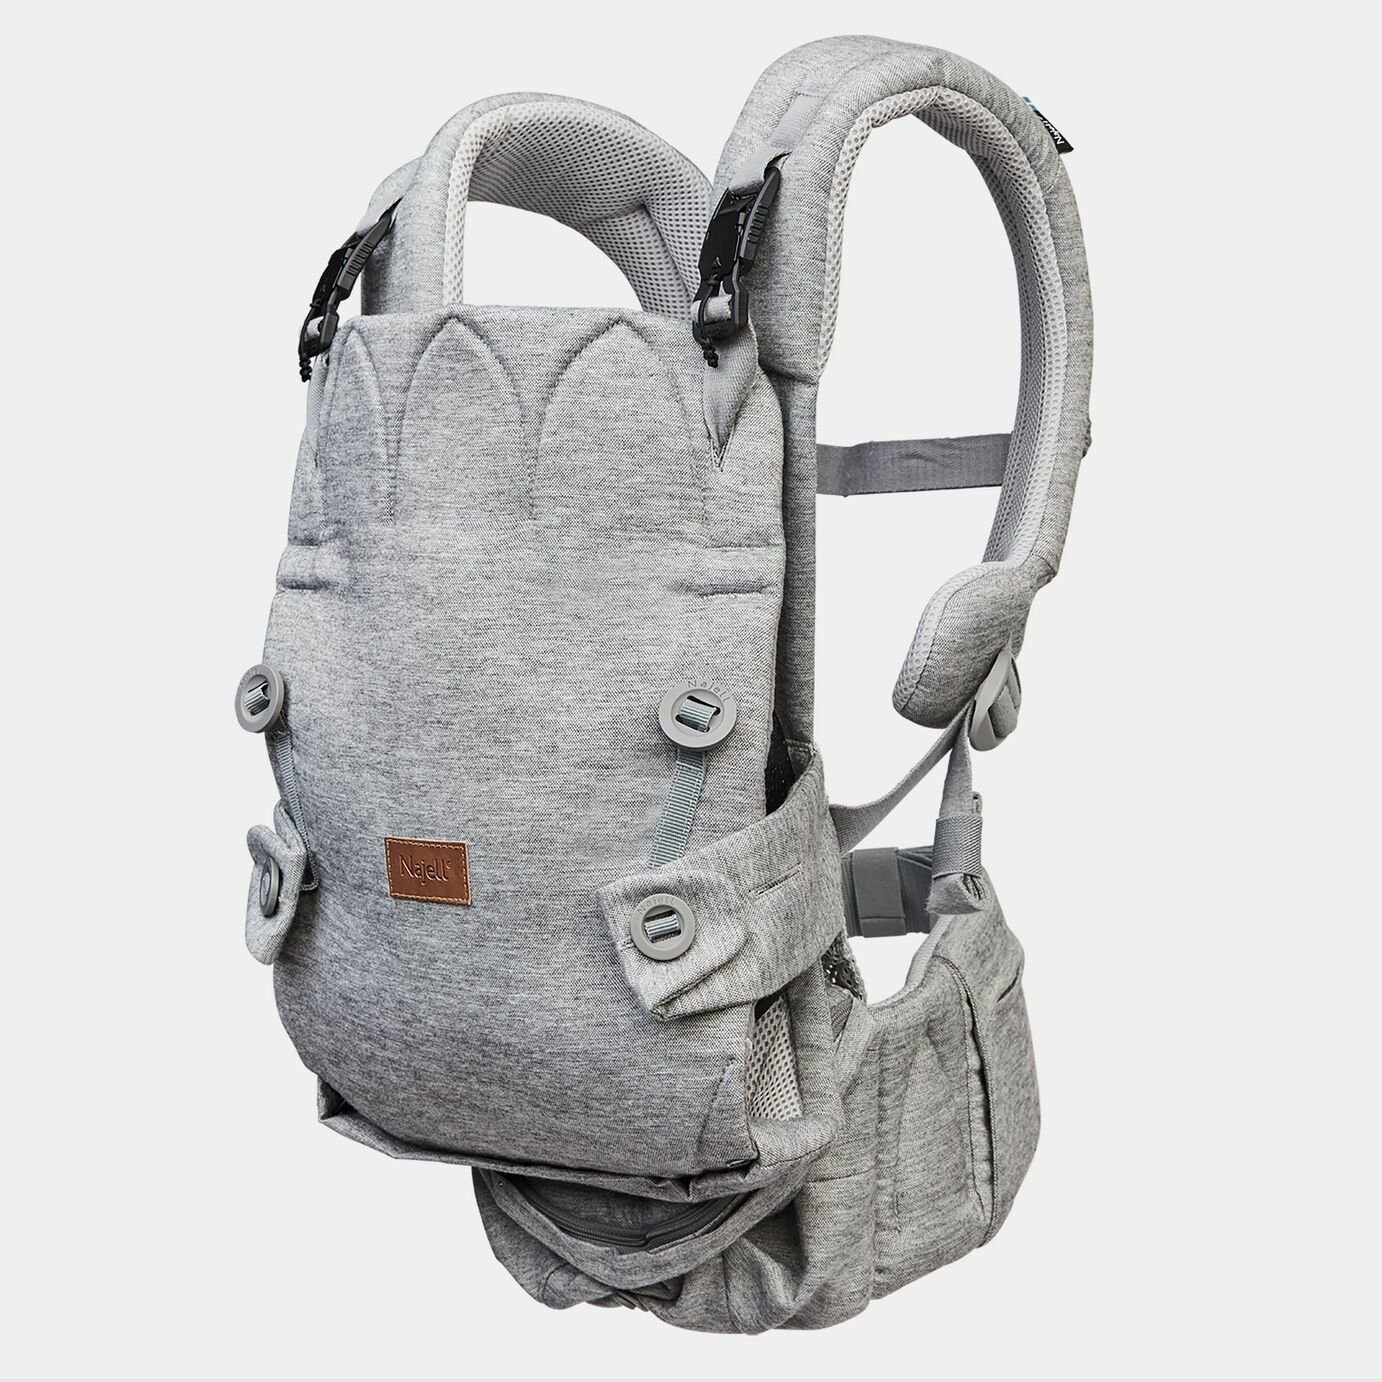 Najell Baby Carrier - Grey